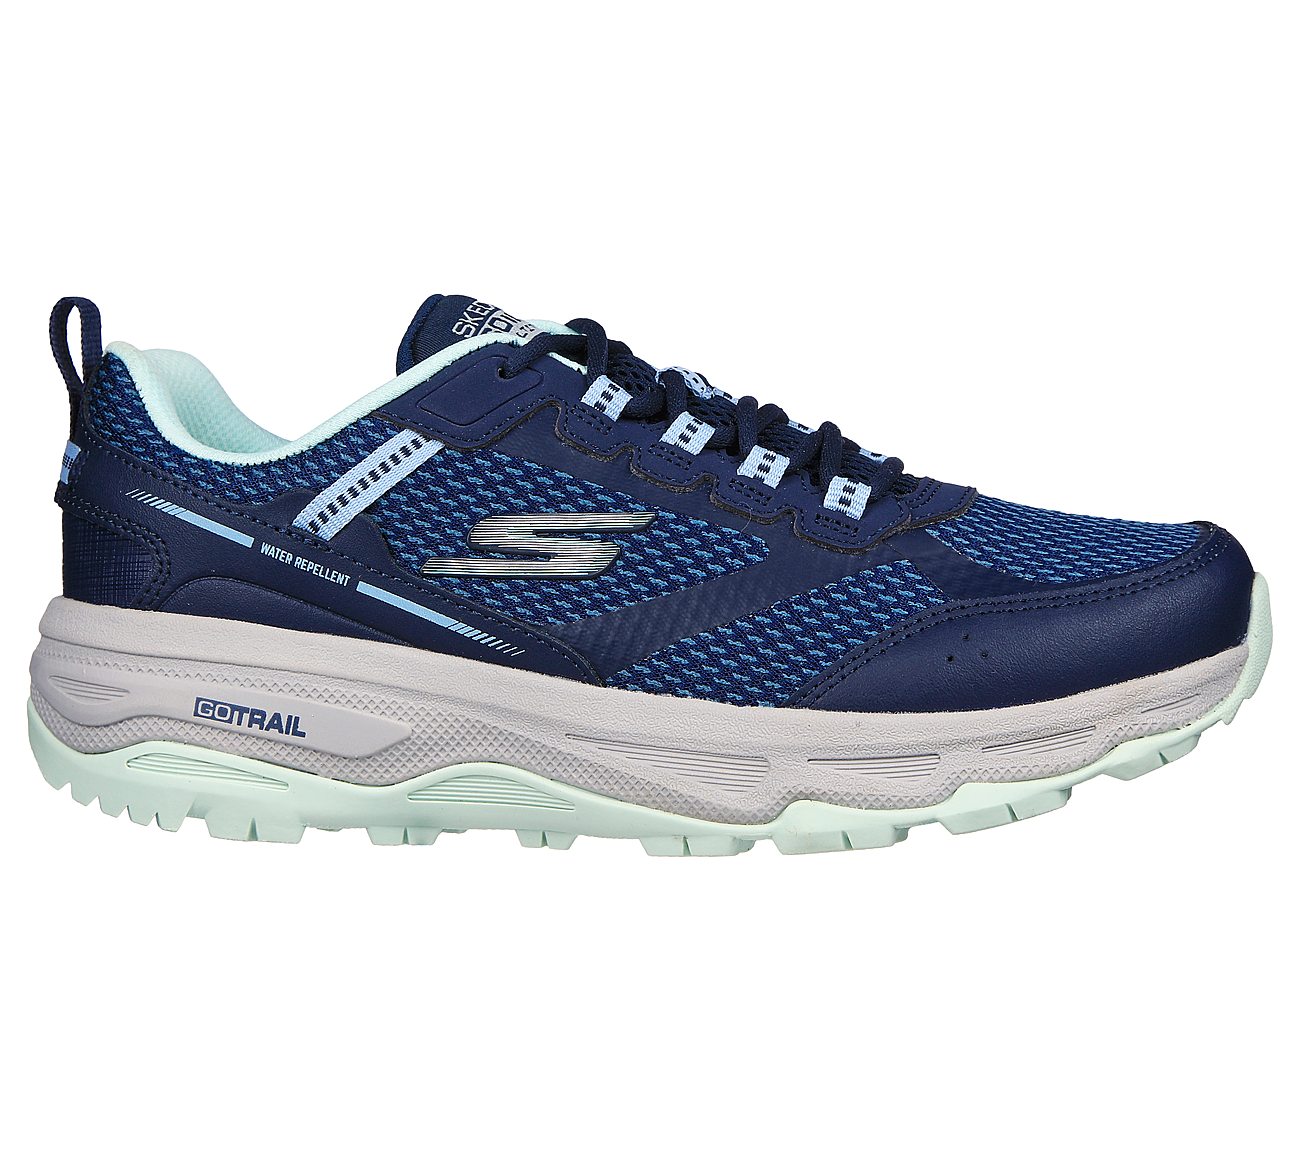 GO RUN TRAIL ALTITUDE, NAVY/TURQUOISE Footwear Right View